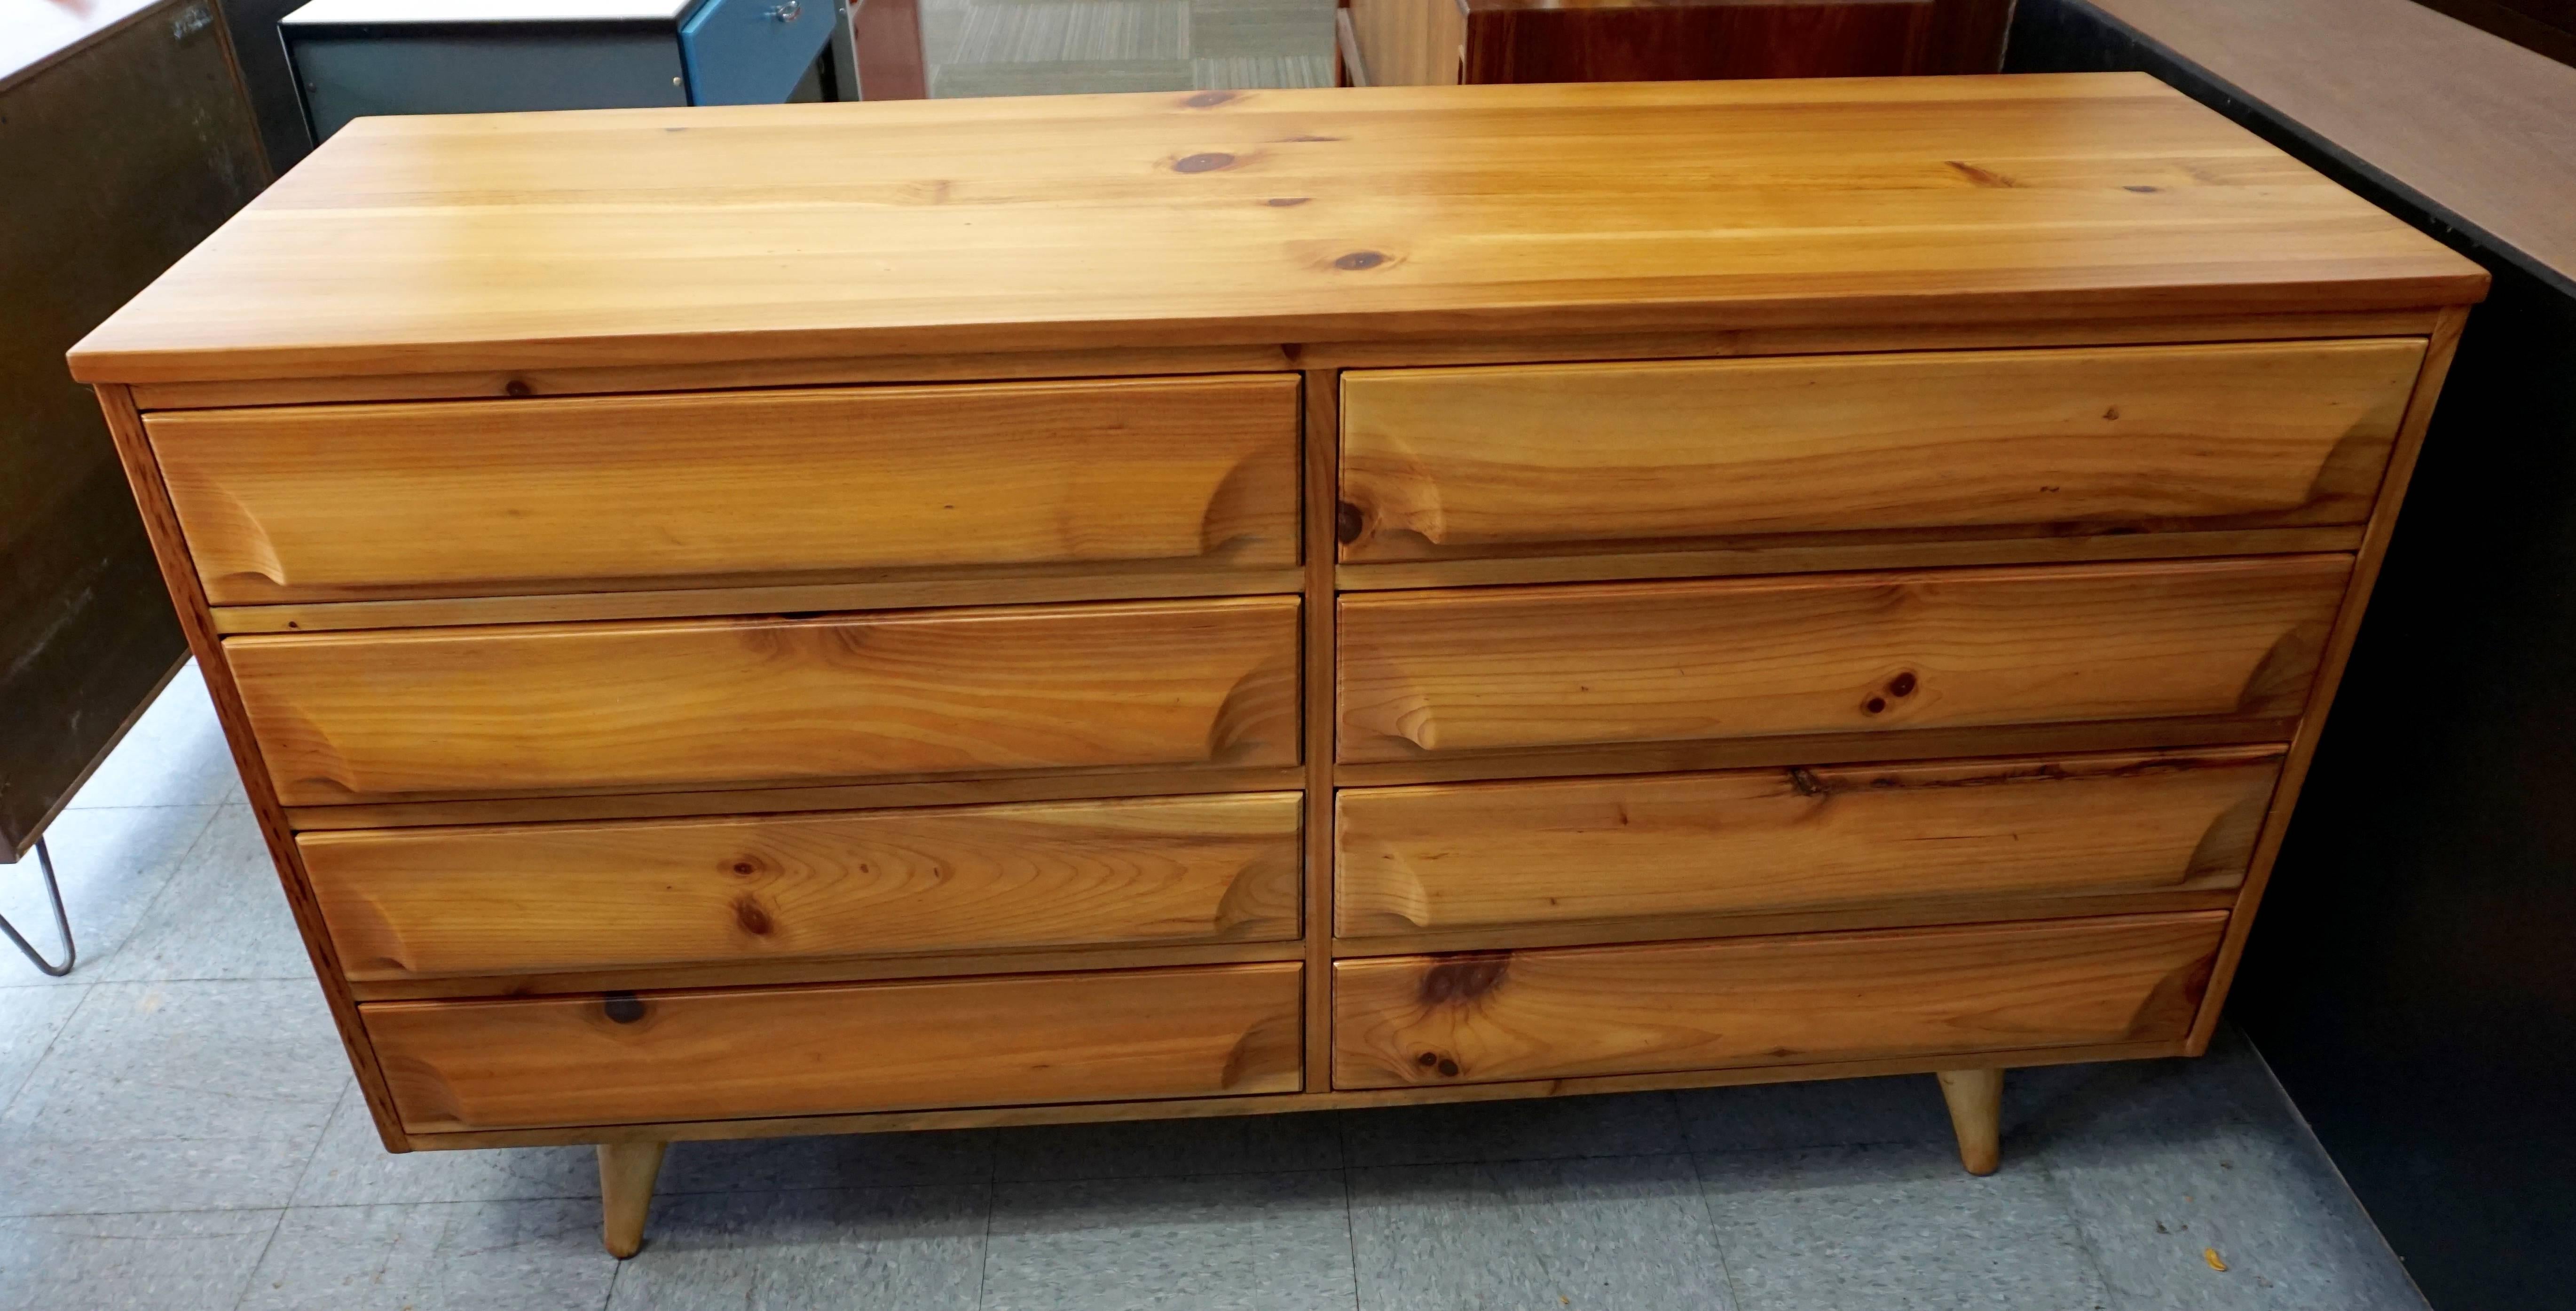 Restored. Labelled. Unusual eight drawer modern pine dresser. Warm color with dark knots. Drawers open smoothly. Few very minor abrasions on surface from normal use.